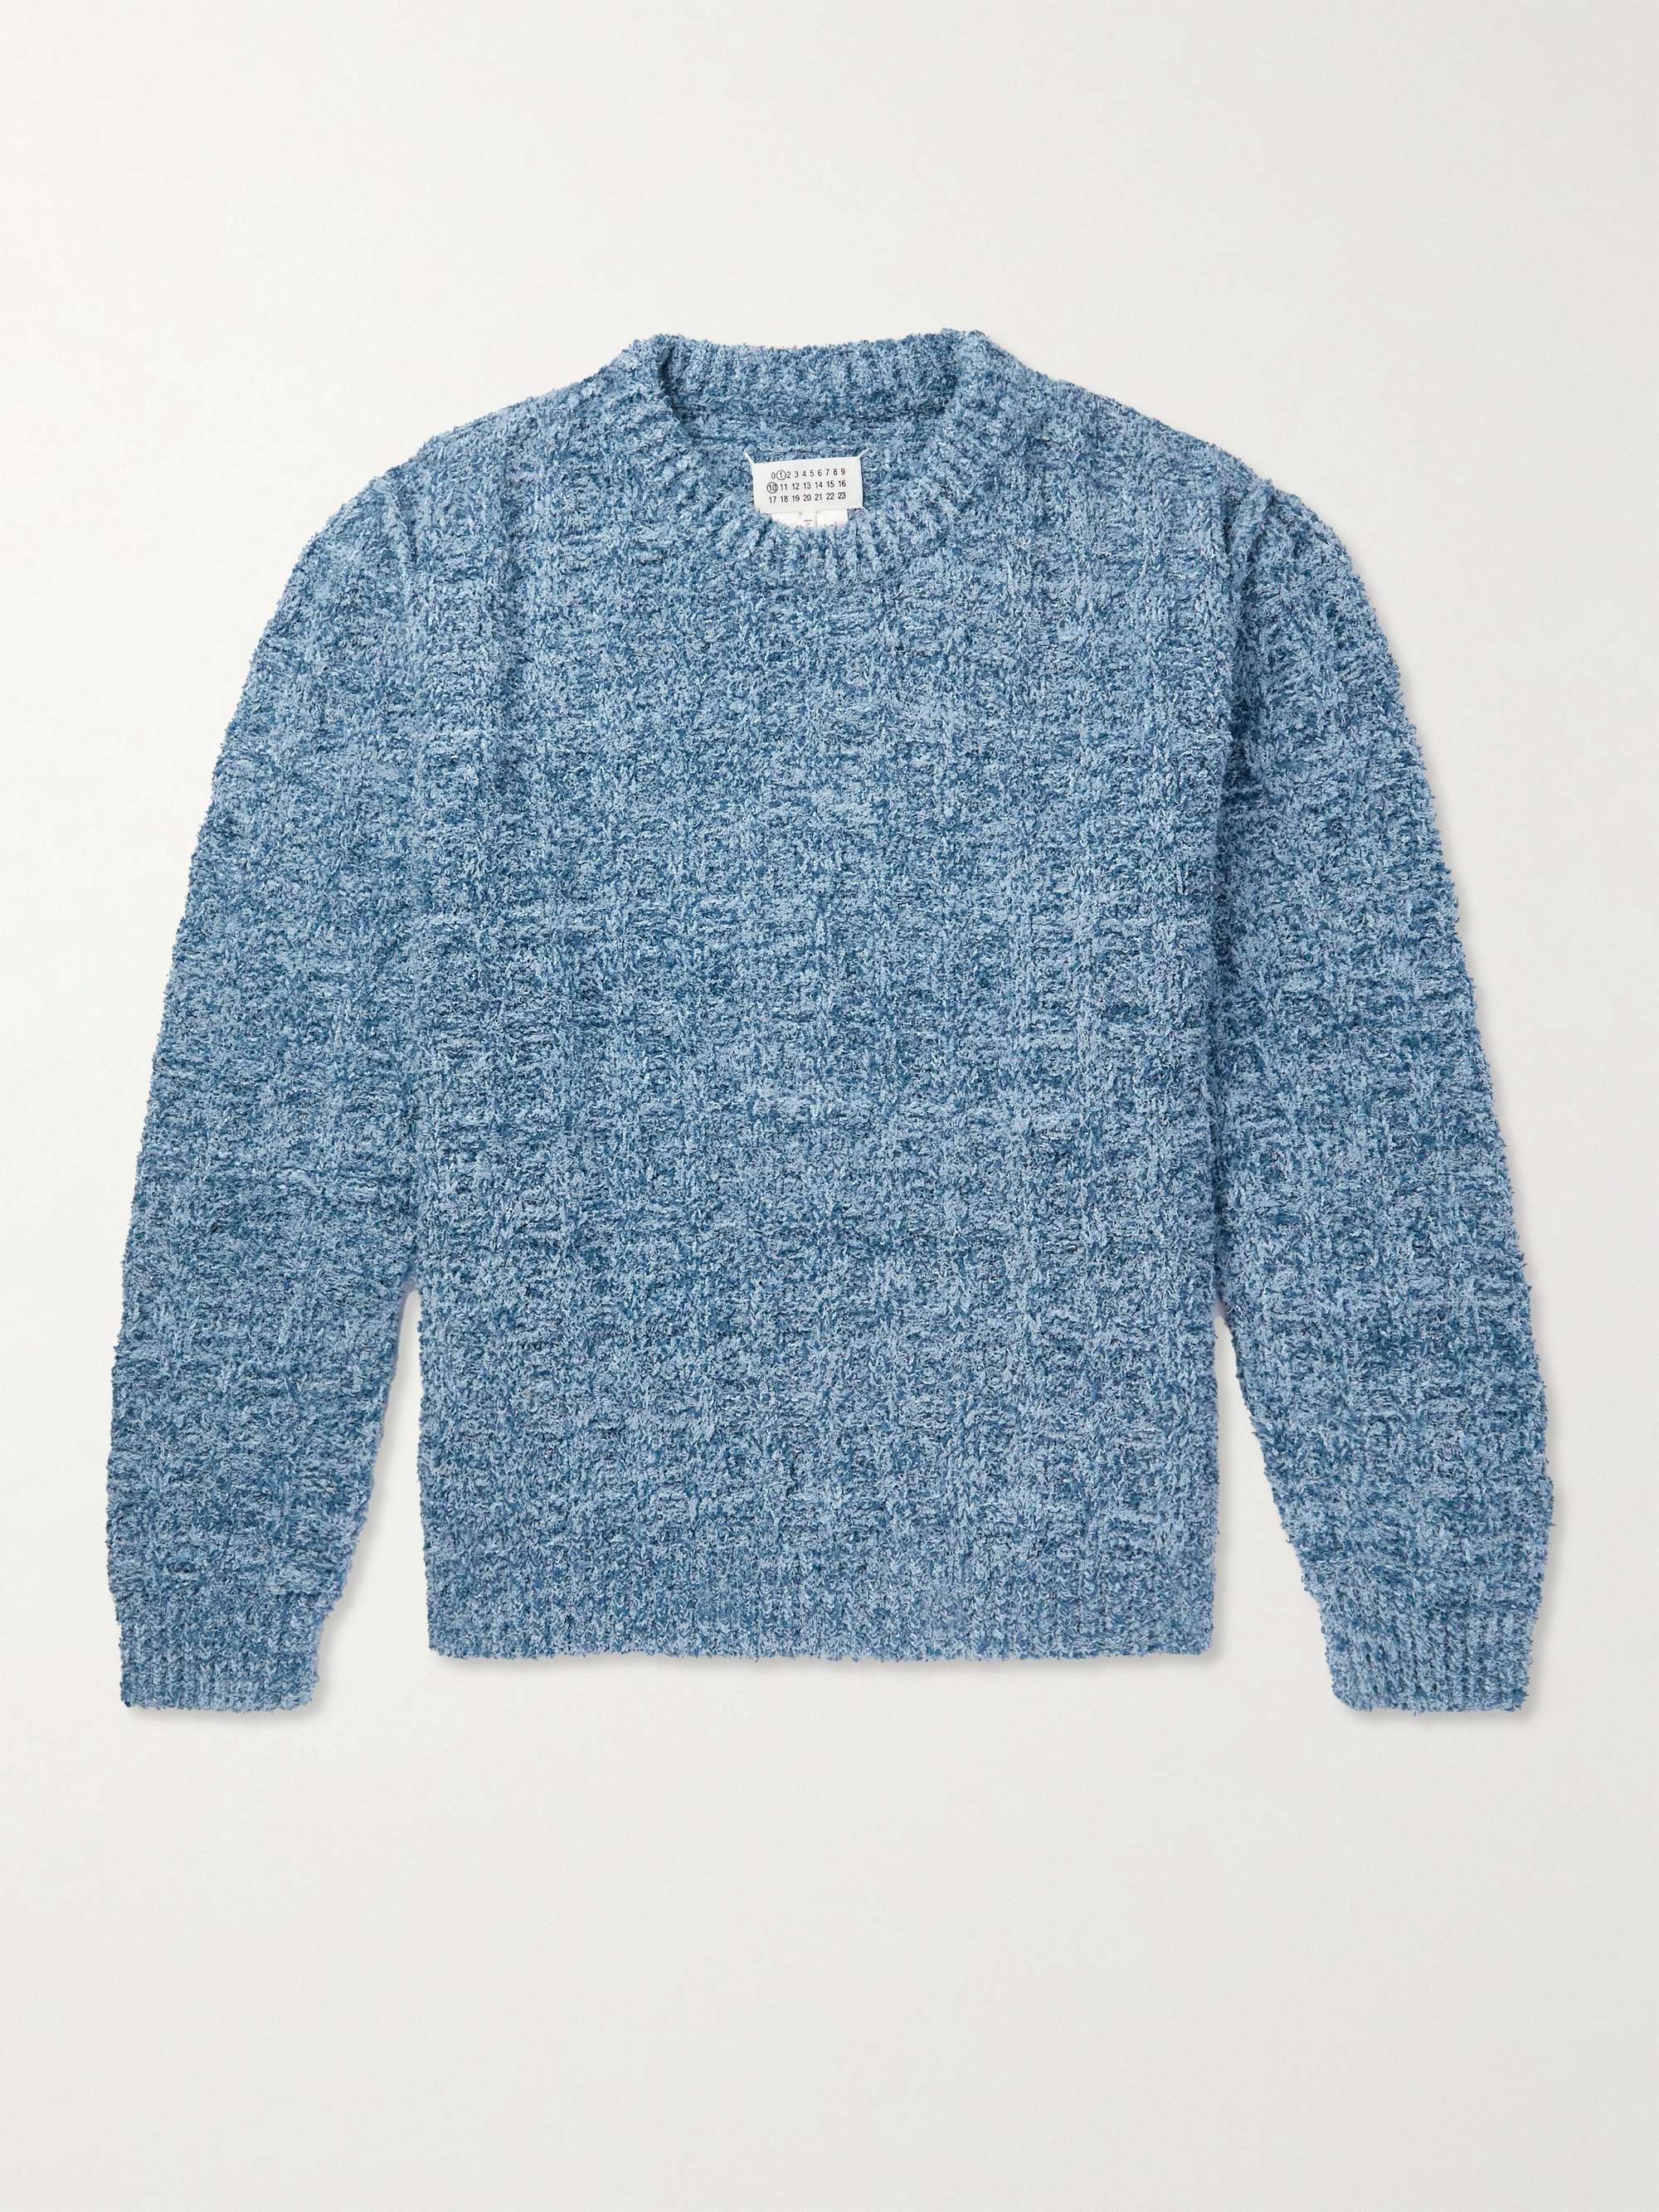 Maison Margiela Wool Oversized Sweater in Blue for Men Mens Clothing Sweaters and knitwear 